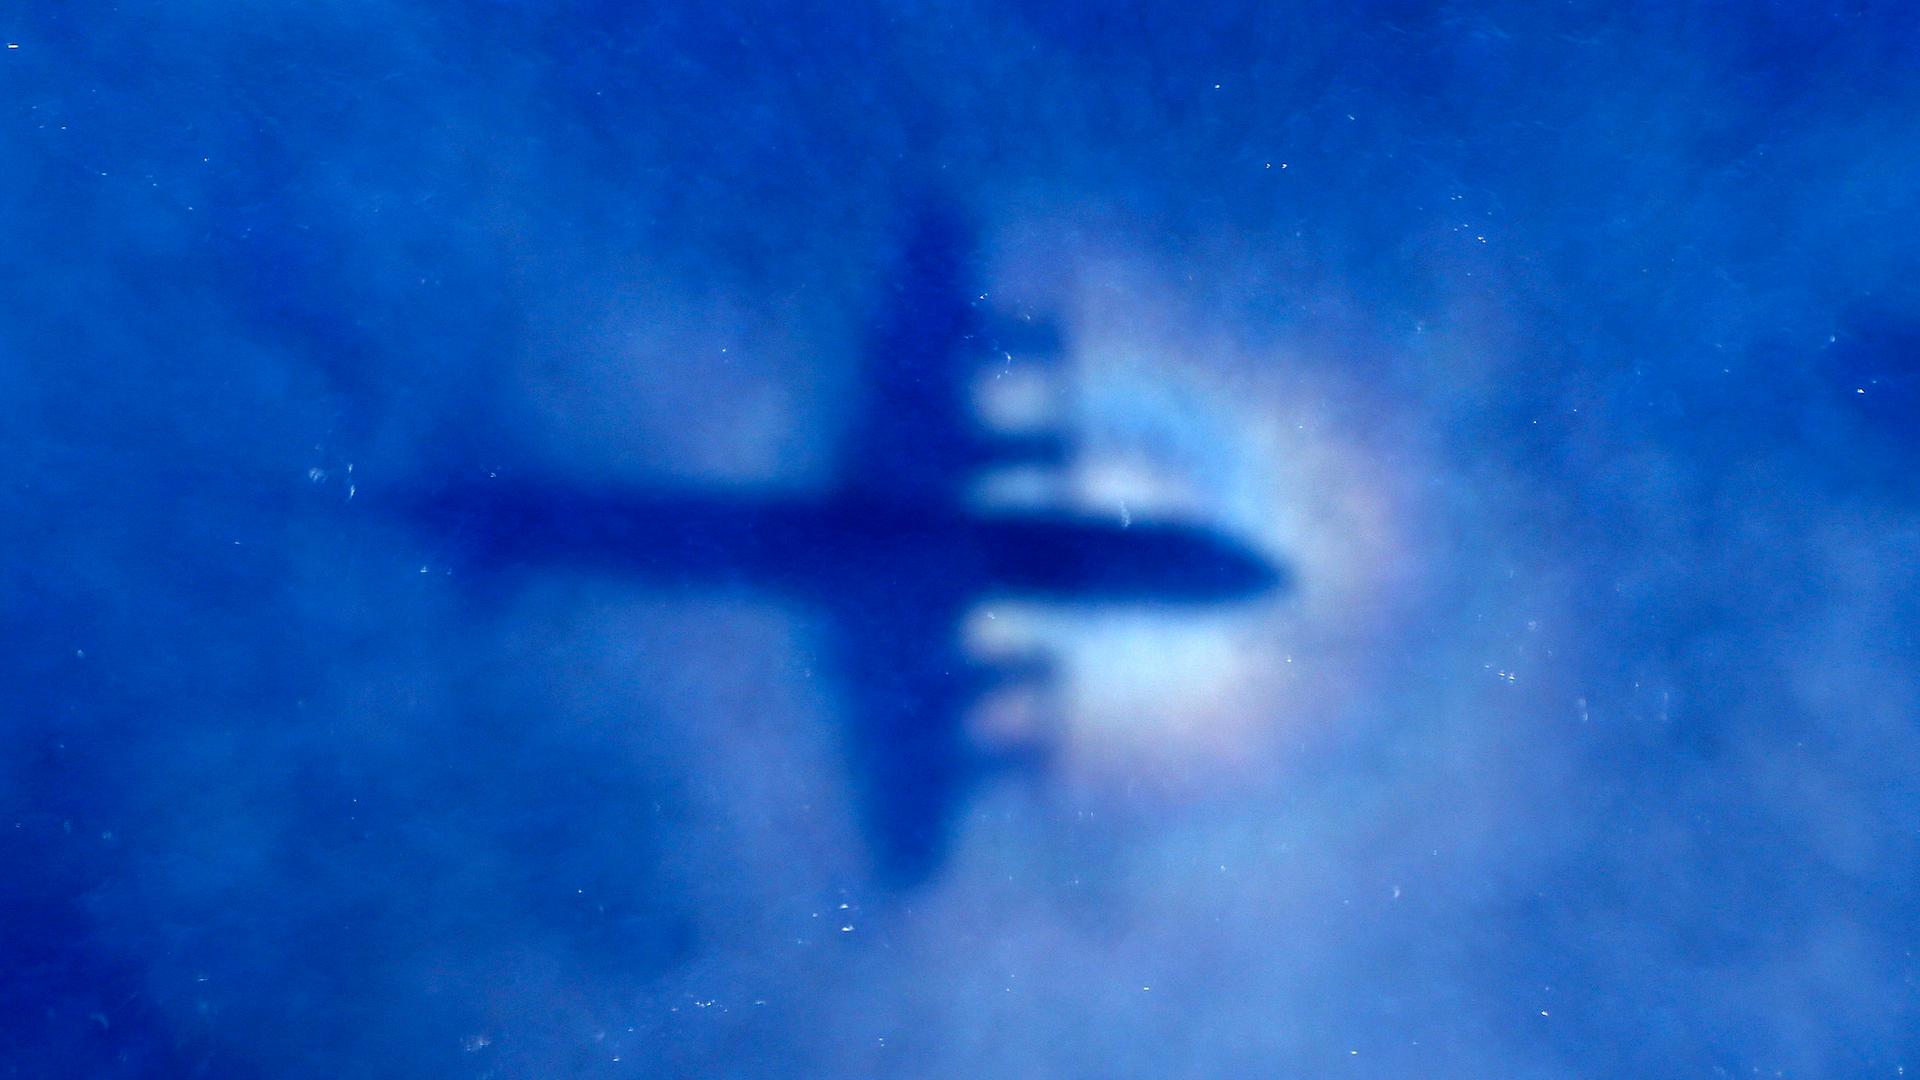 The shadow of a Royal New Zealand Air Force P-3 Orion maritime search aircraft can be seen on low-level clouds as it flies over the southern Indian Ocean looking for missing Malaysian Airlines Flight 370 on March 31, 2014.